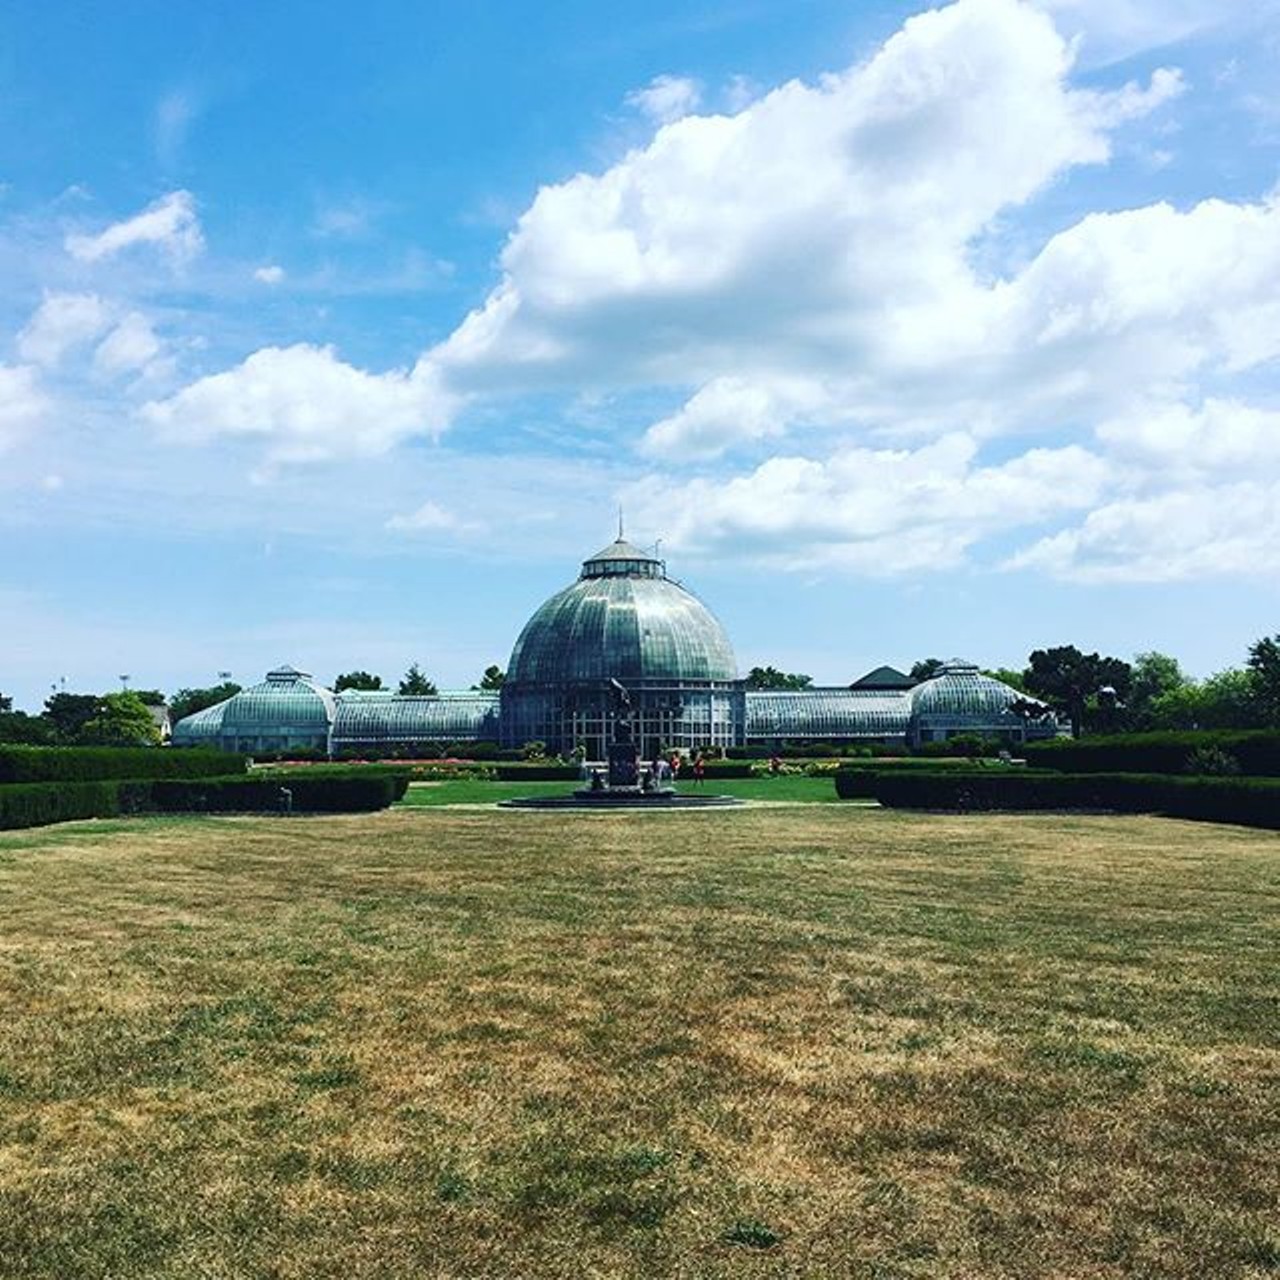 Belle Isle Conservatory, Detroit, Michigan 
Resting between the Detroit - Canada border, the Belle Isle Conservatory gives us a taste of the old Detroit. With beautiful plants stretching 982 acres, it&#146;s a breath of fresh air in the bustling city.  (Photo via Instagram, @caleal71)